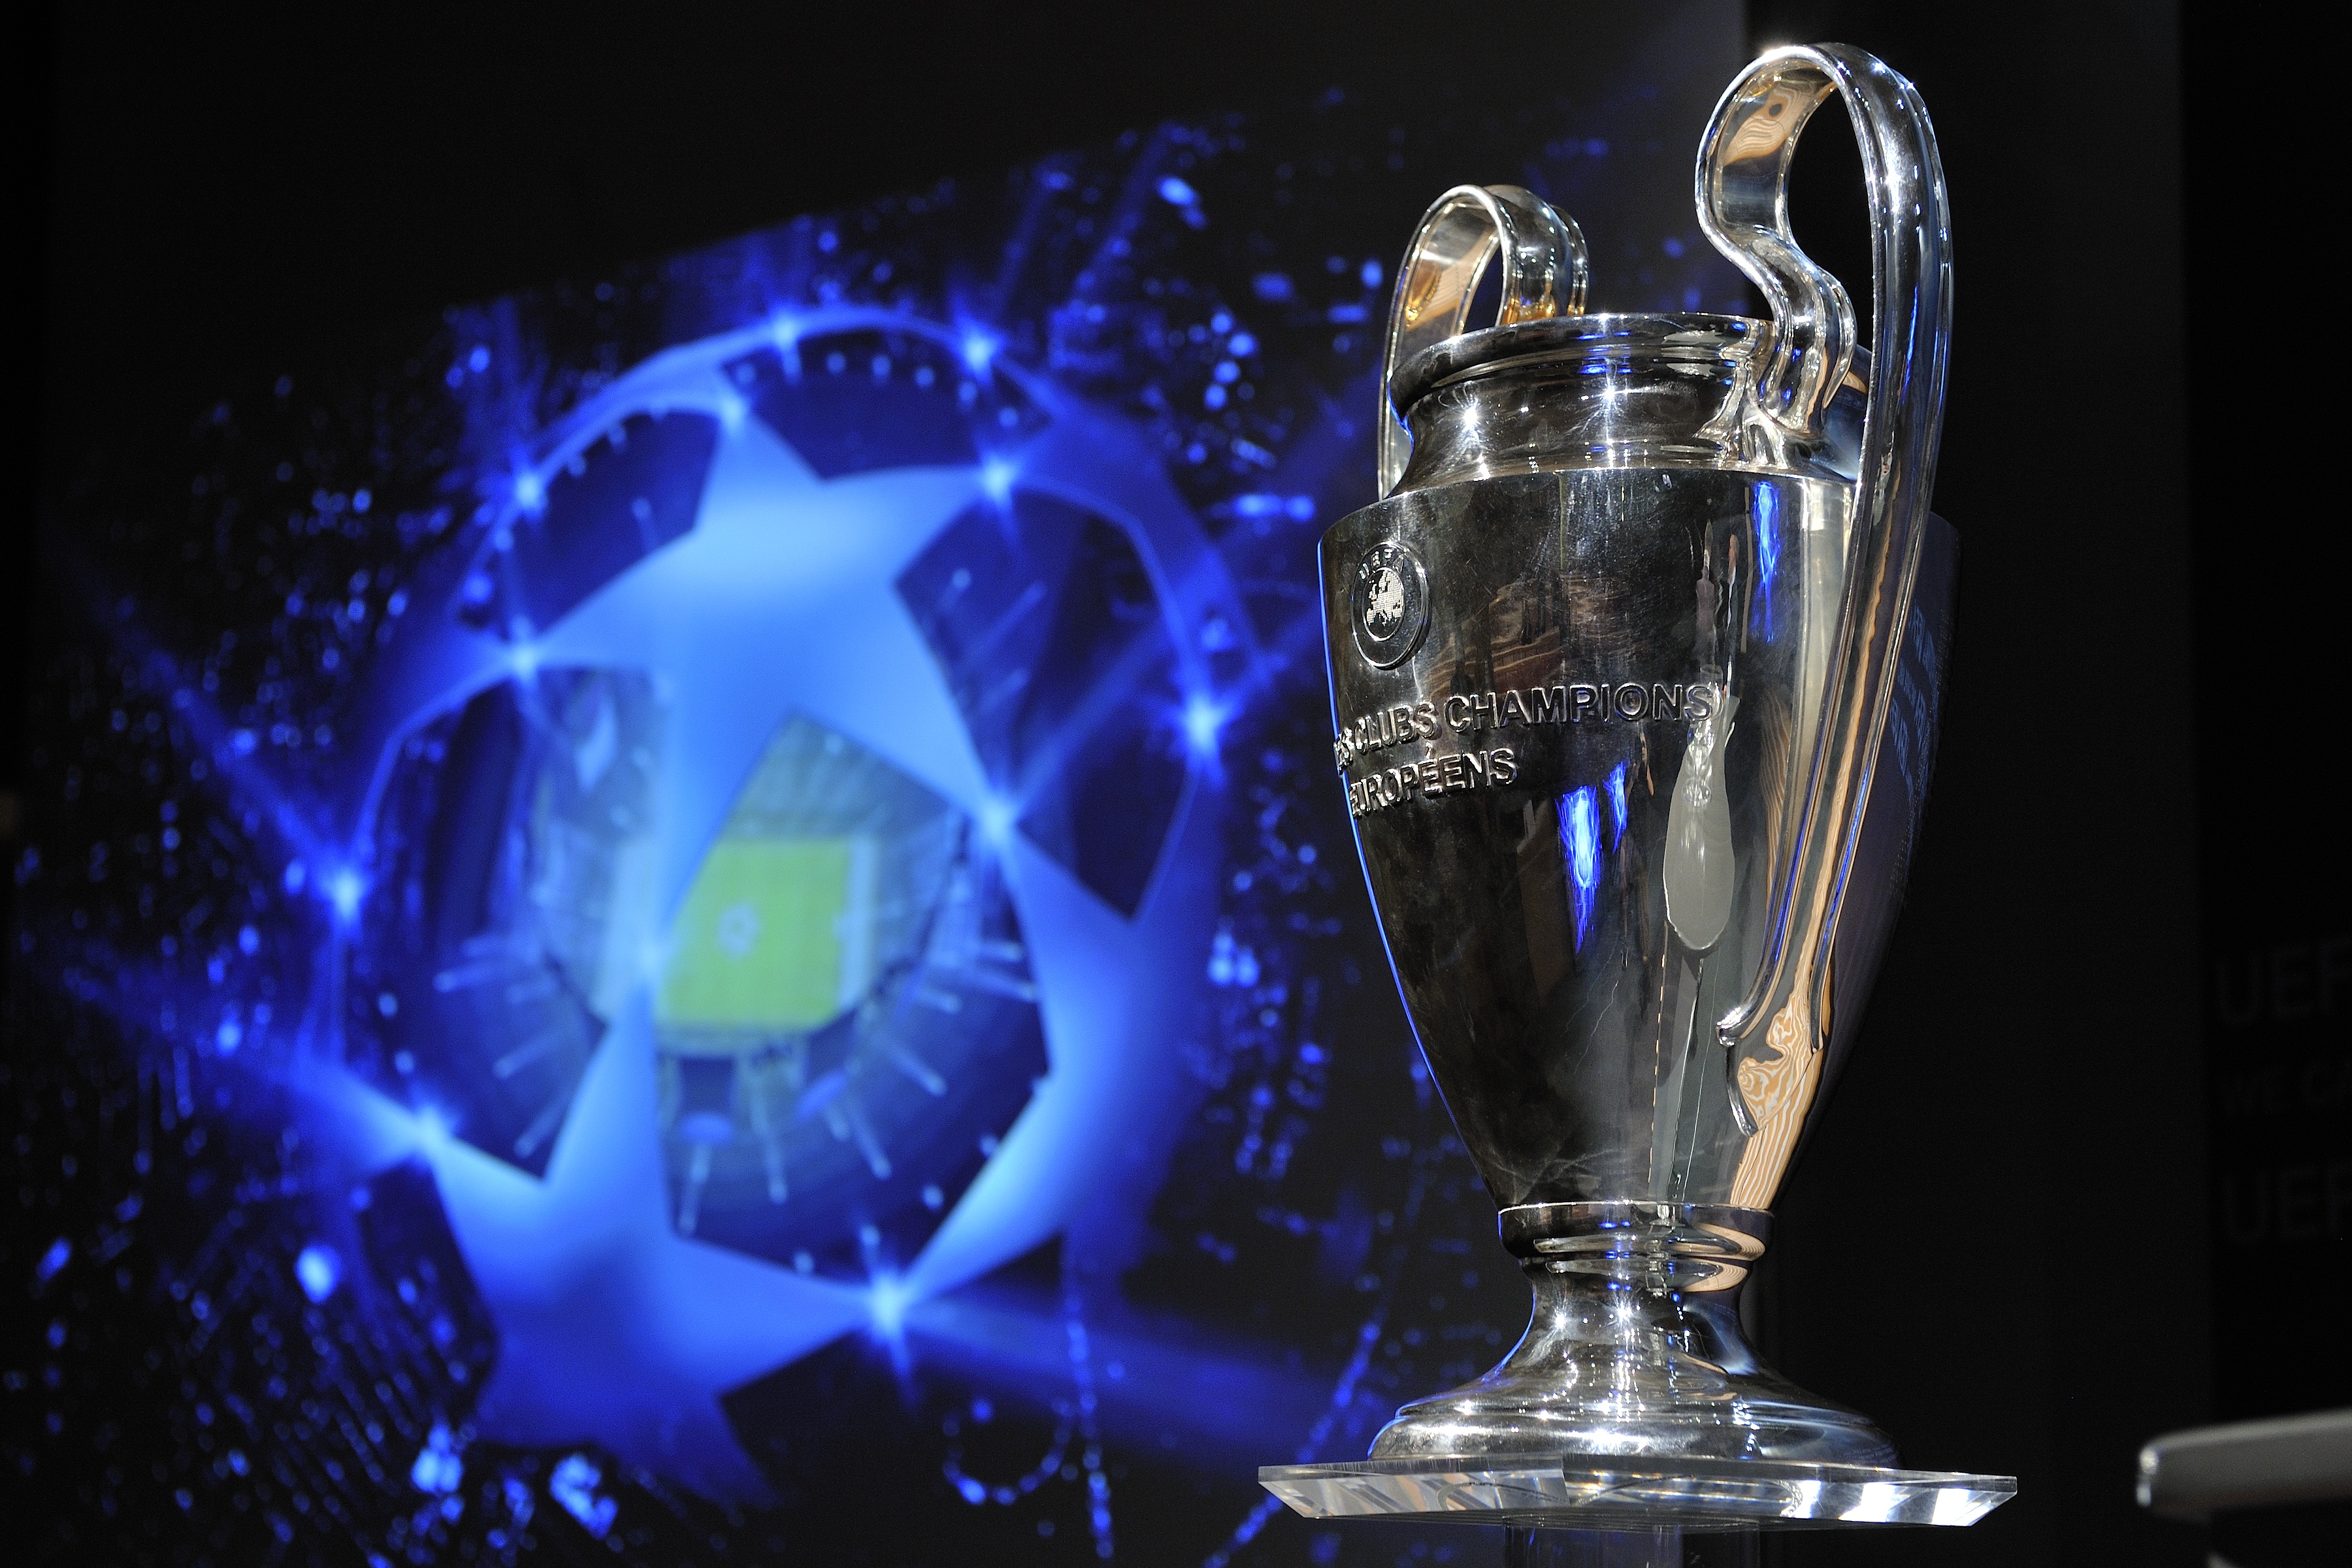 NYON, SWITZERLAND - AUGUST 06:  The UEFA Champions League trophy is displayed after the UEFA Champions League play-off draw on August 6, 2010 in Nyon, Switzerland. The play-offs are played over two legs on 17/18 and 24/25 August. The ten play-off winners